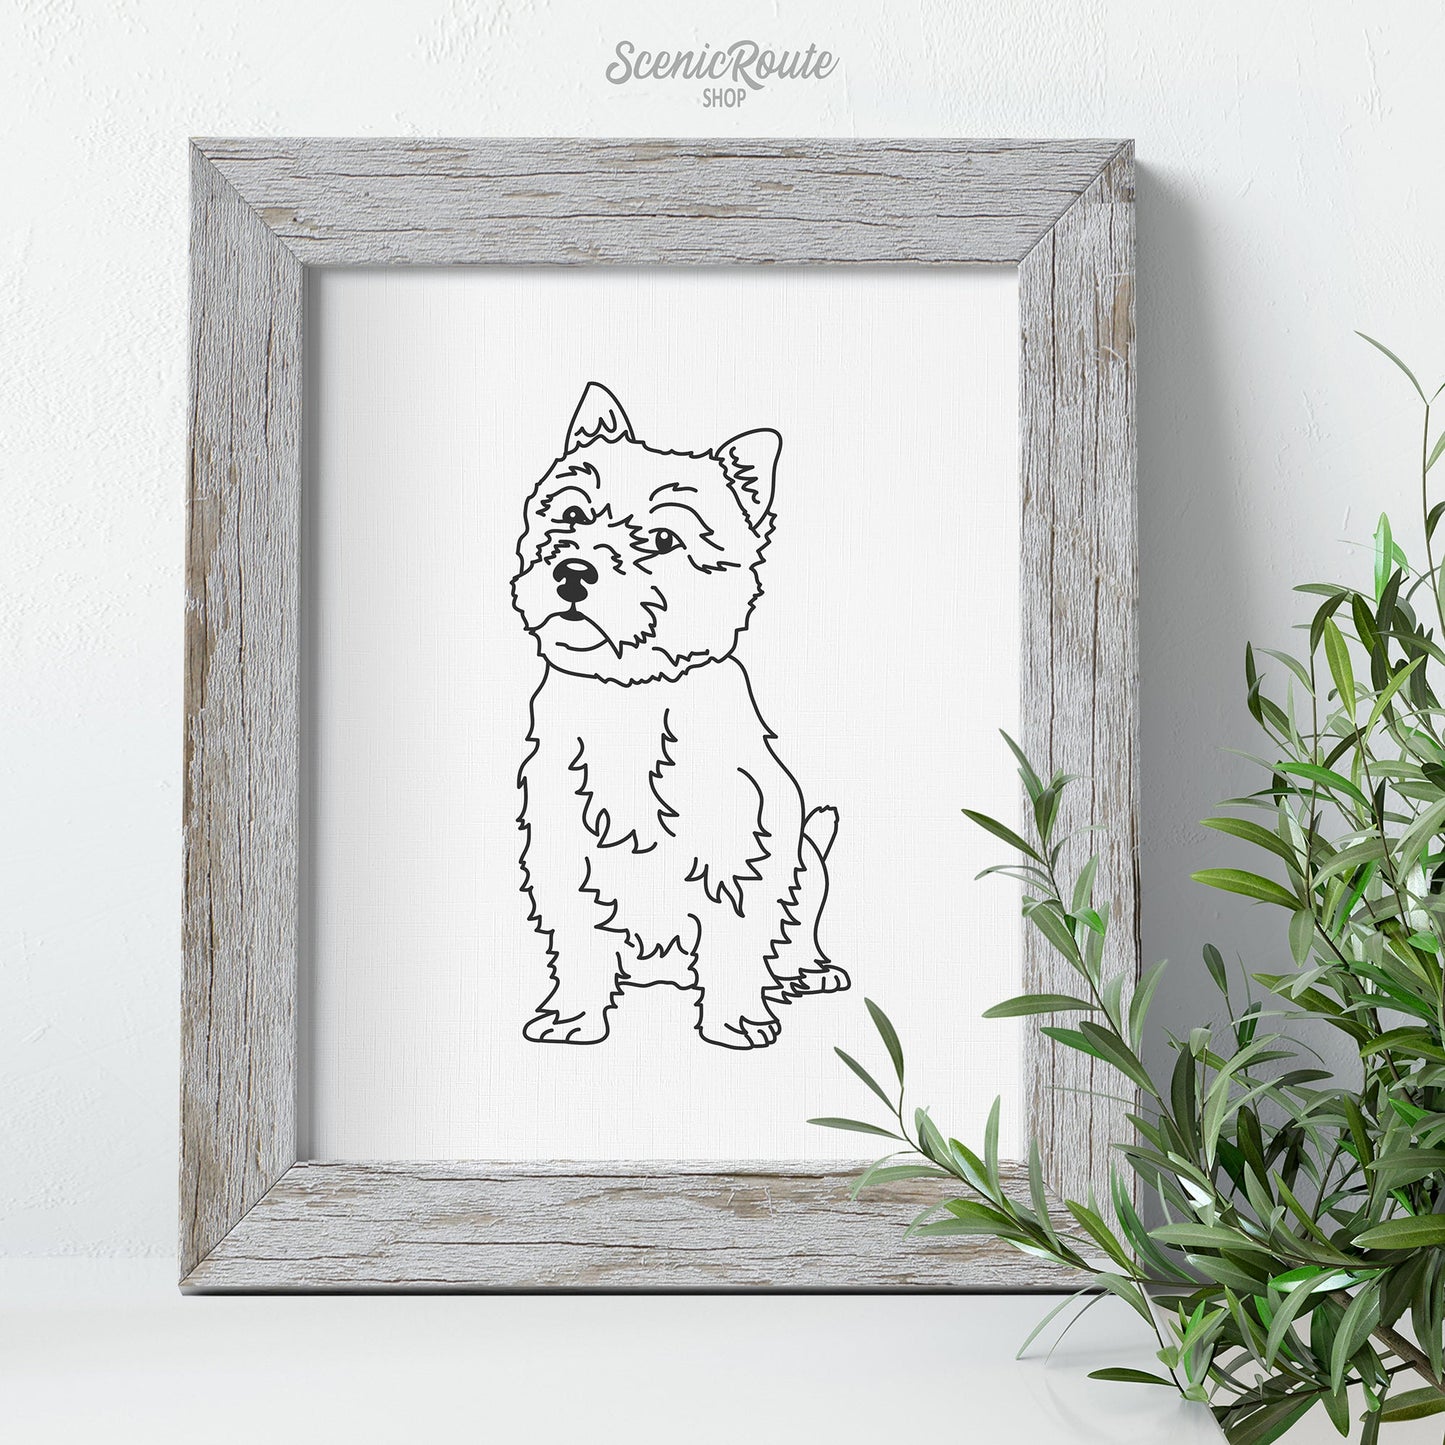 A framed line art drawing of a Norwich Terrier dog with a plant